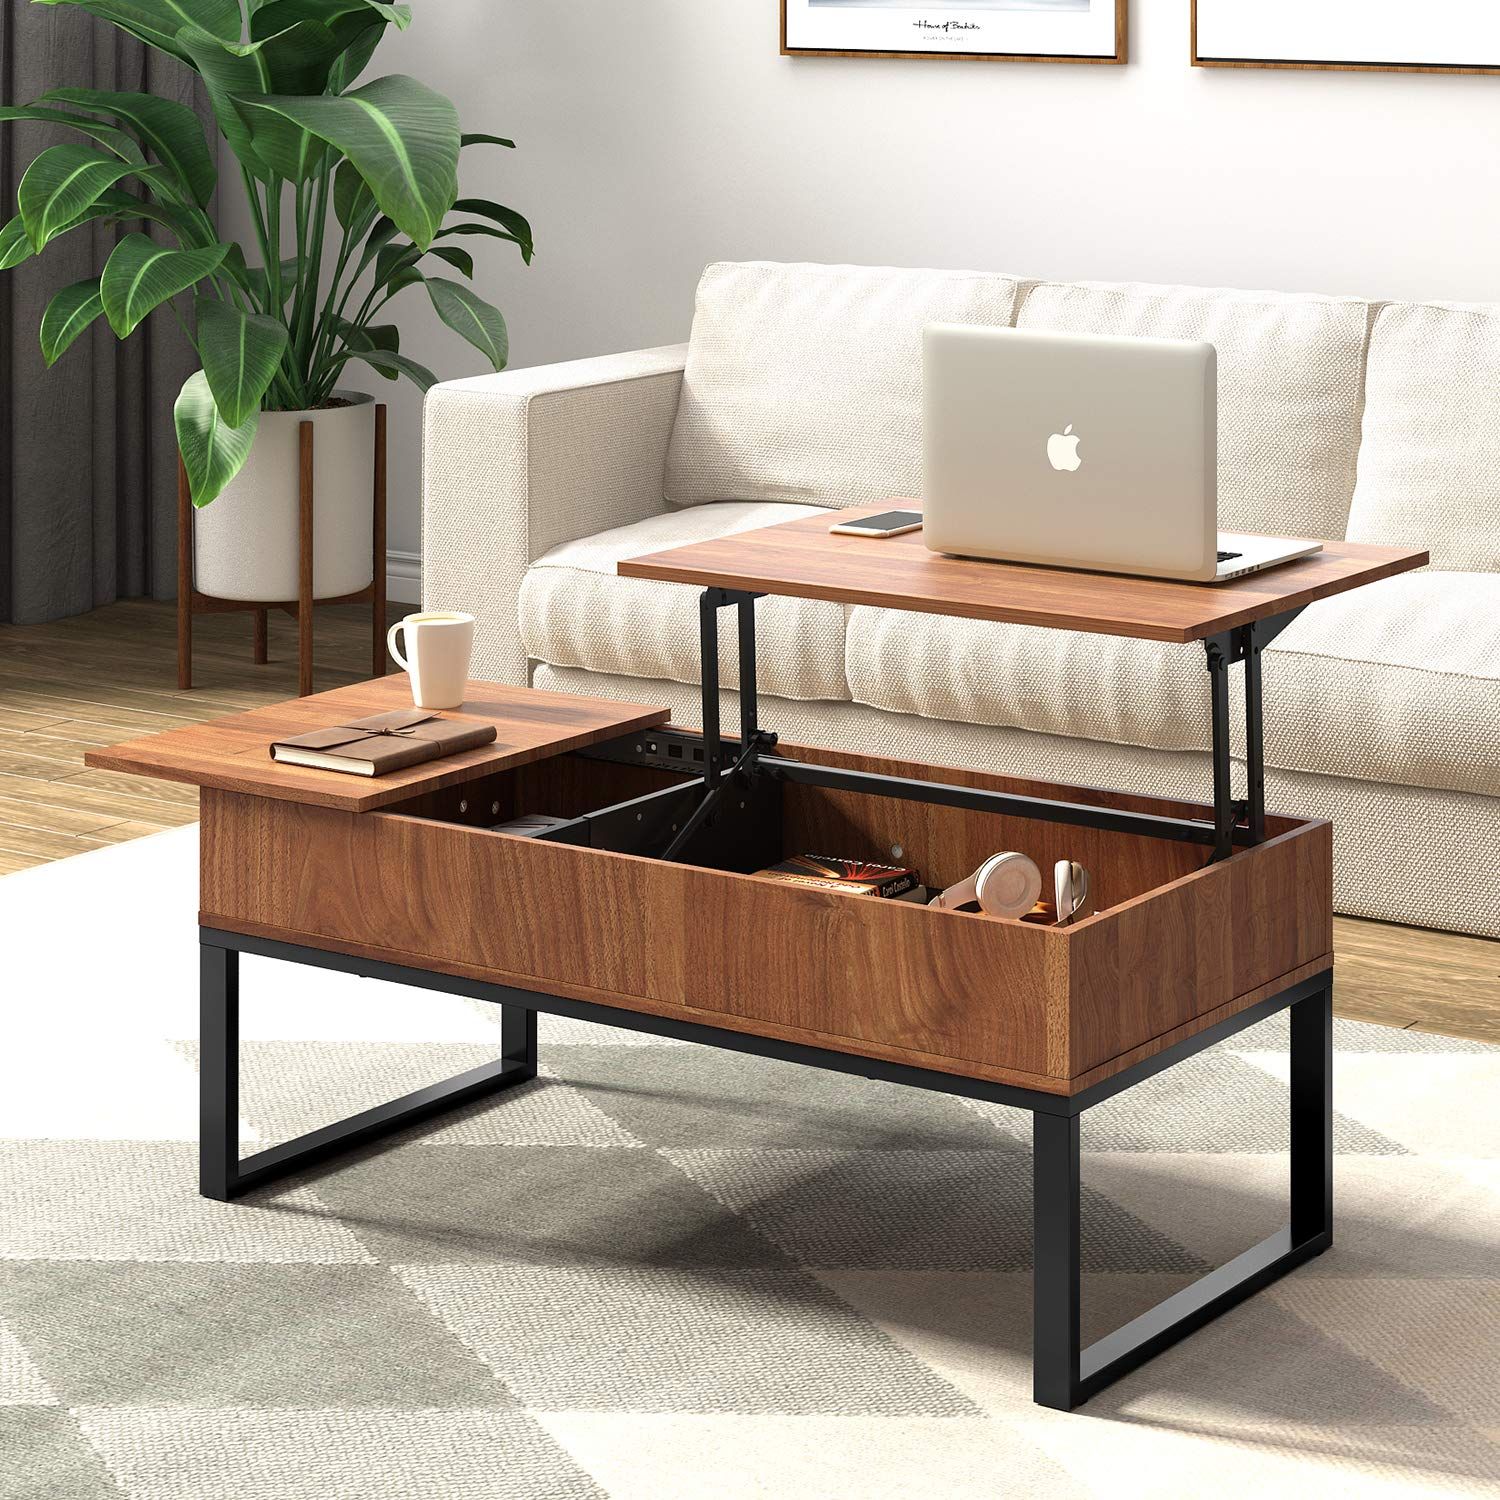 Wlive Wood Coffee Table With Adjustable Lift Top Table, Metal Frame Throughout Modern Coffee Tables With Hidden Storage Compartments (View 8 of 20)